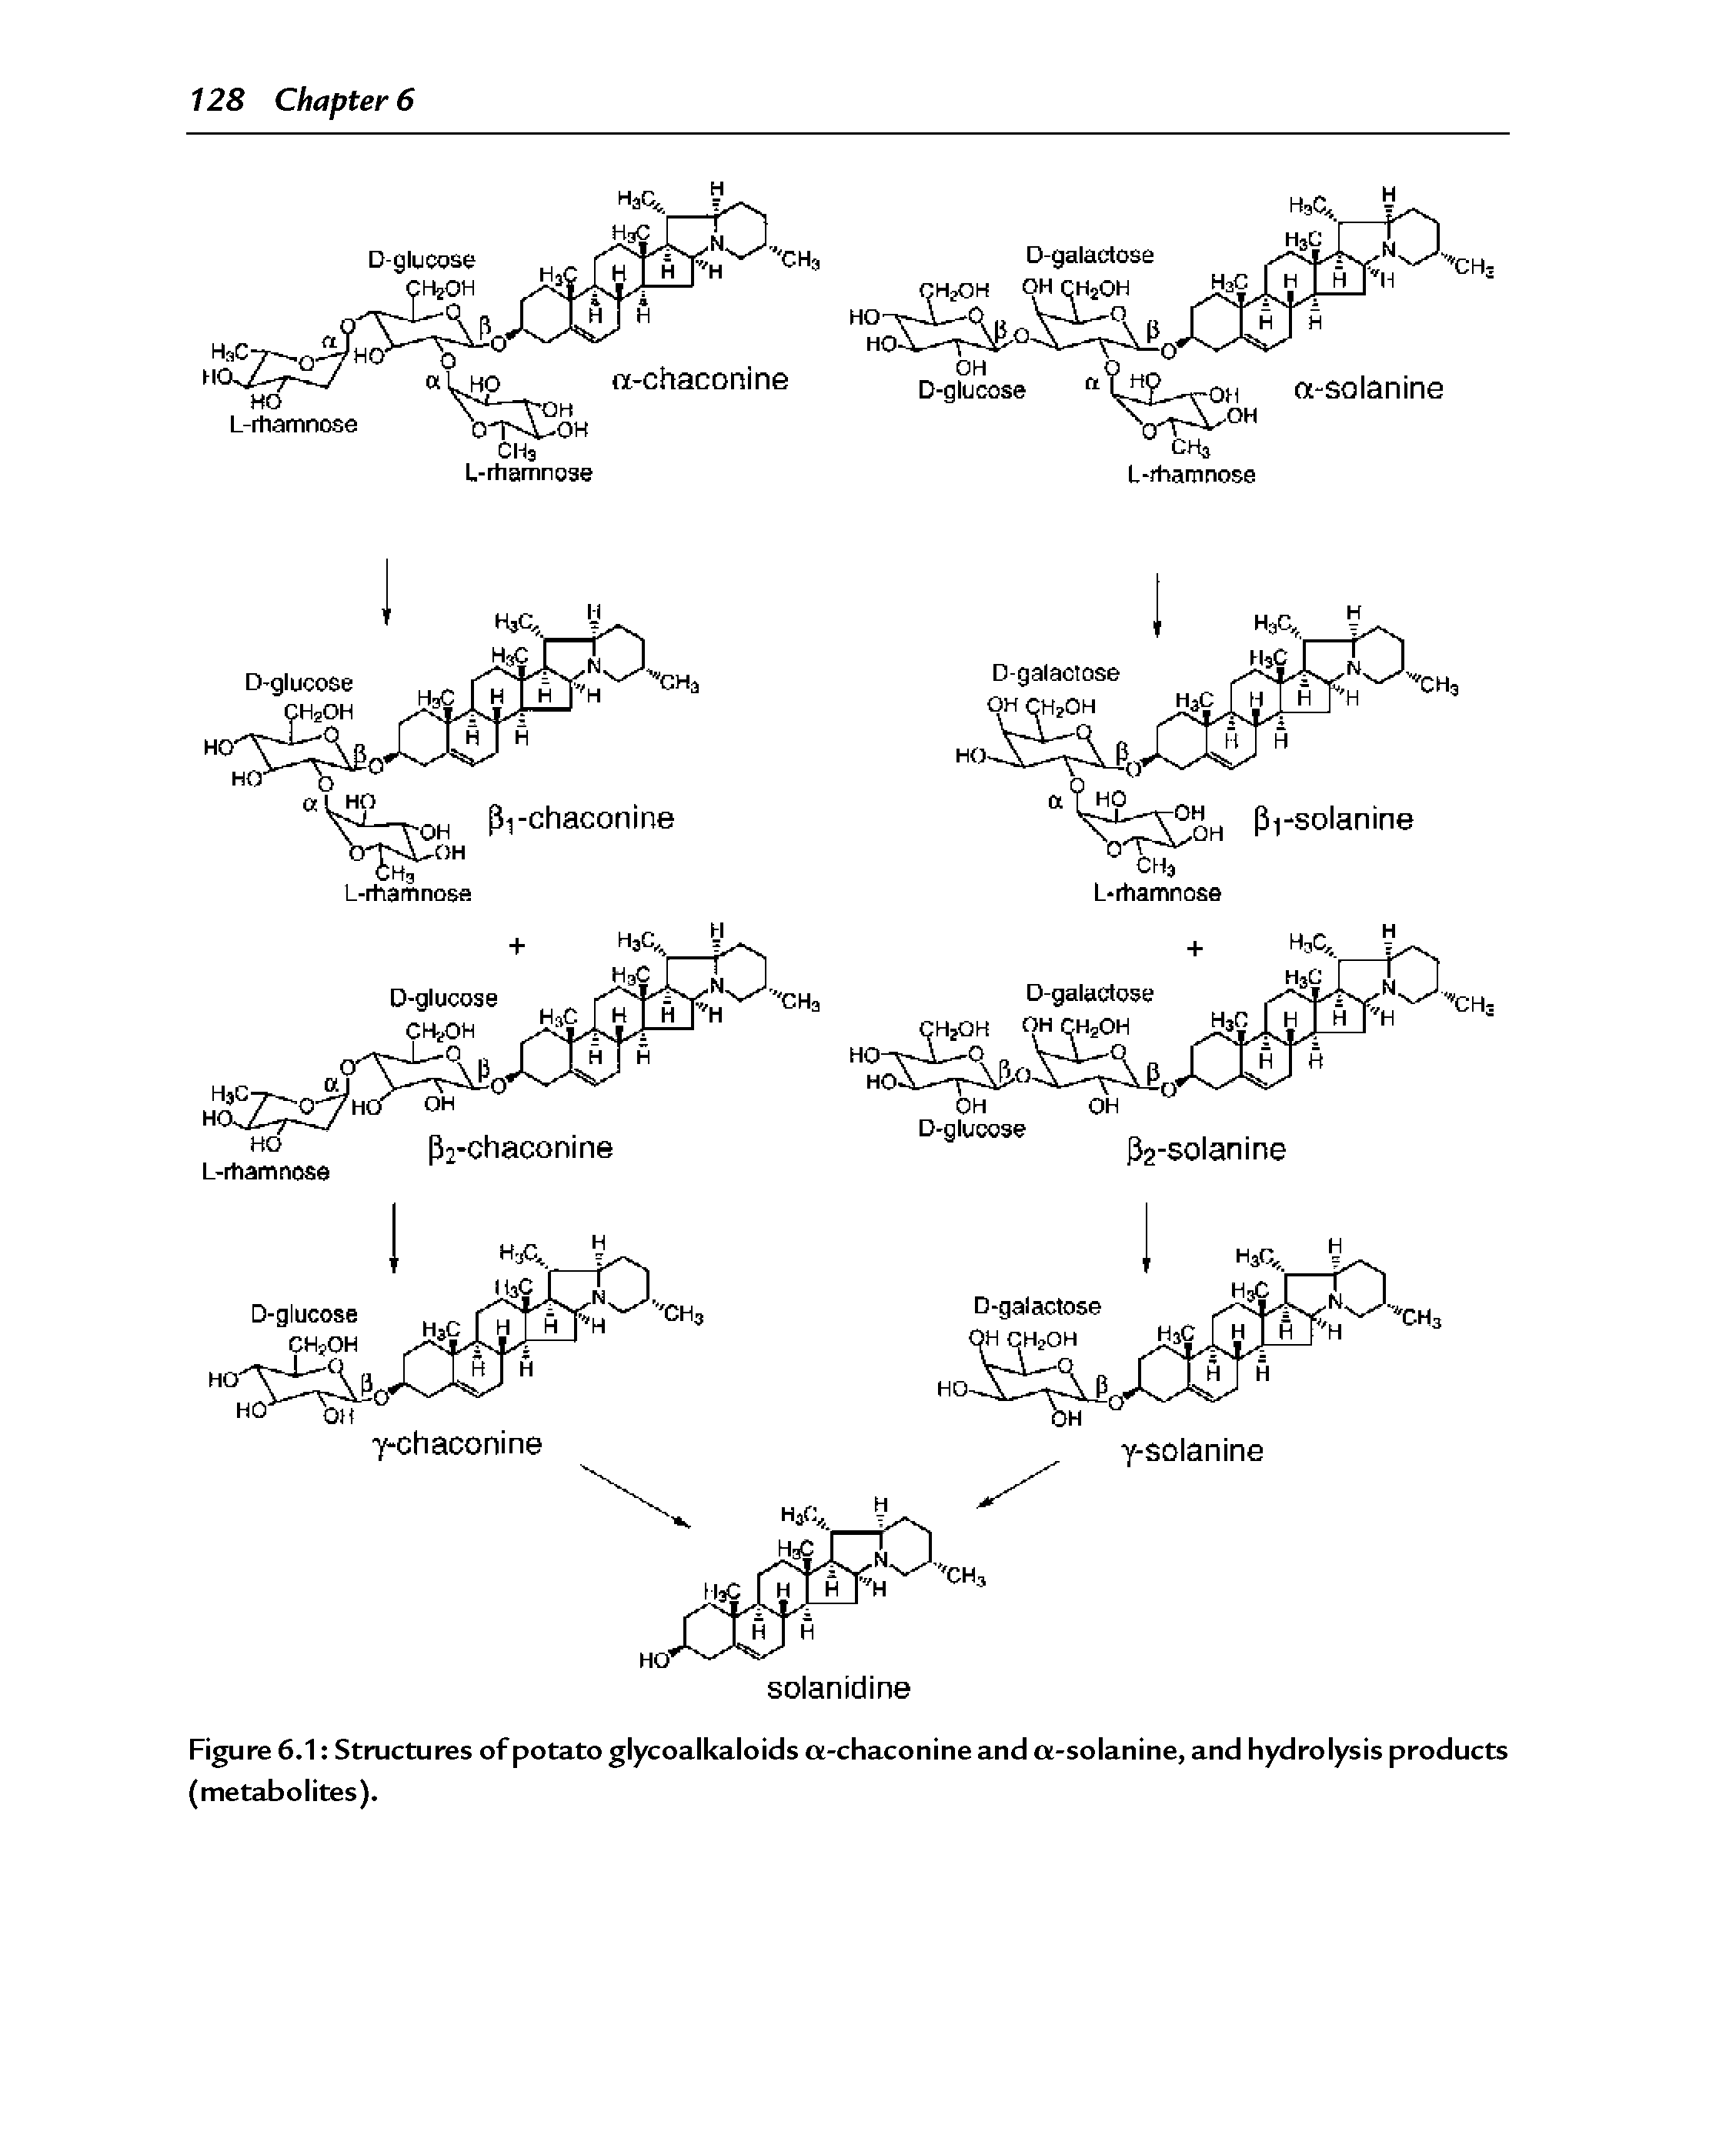 Figure 6.1 Structures of potato glycoalkaloids a-chaconine and a-solanine, and hydrolysis products (metabolites).